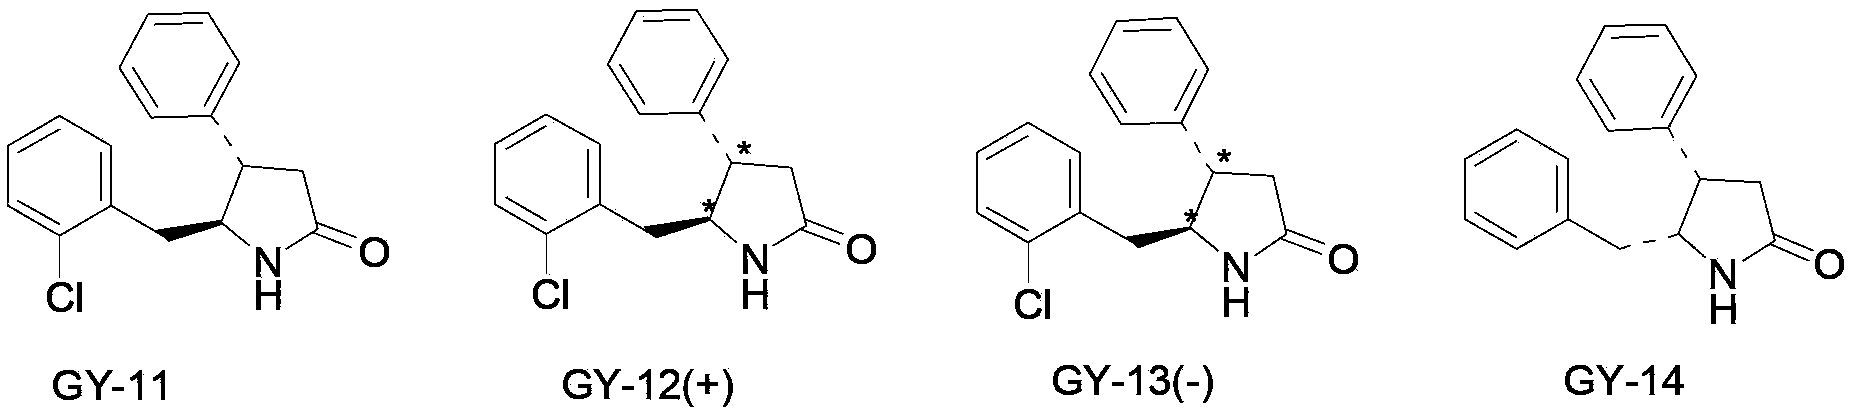 New use of 4, 5-disubstituted-2-pyrrolidone compound